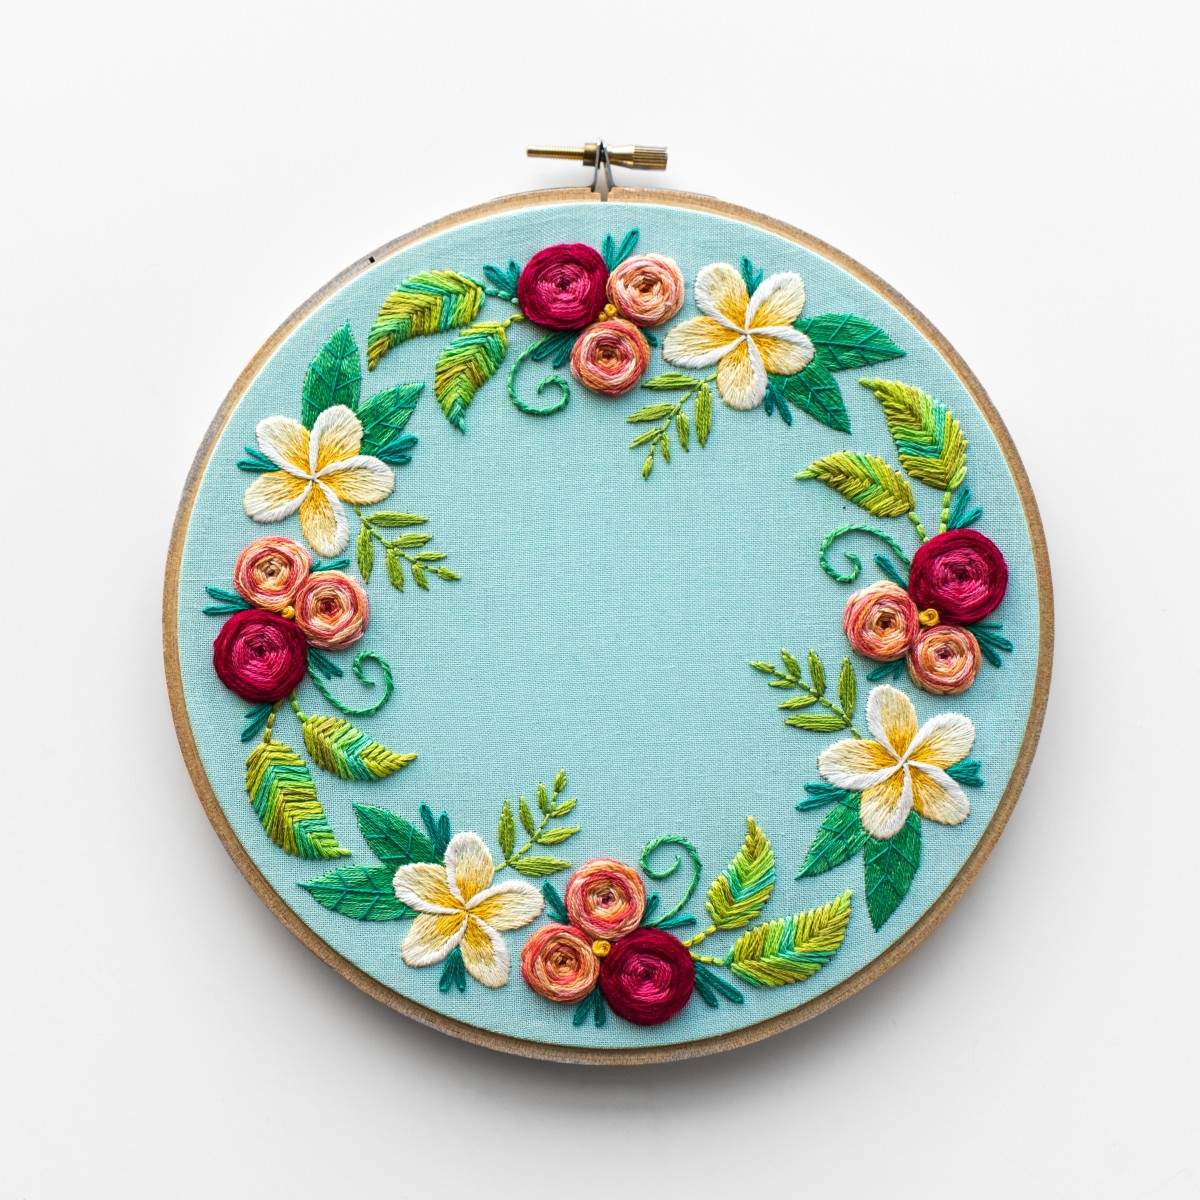 Hand Embroidery Flowers Patterns 5 Beginner Hand Embroidery Projects